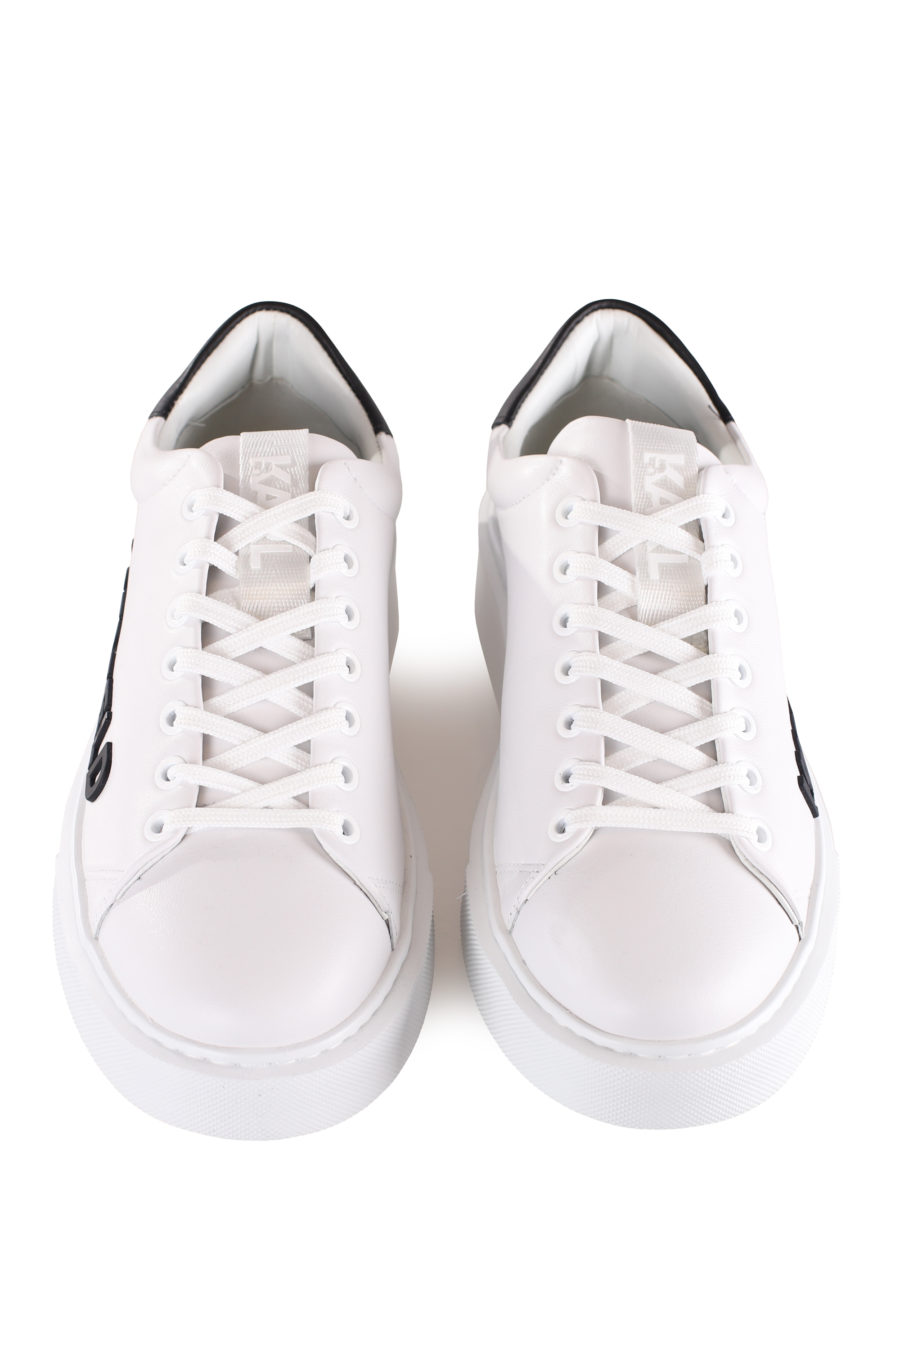 White trainers with maxi rubber logo - IMG 9591